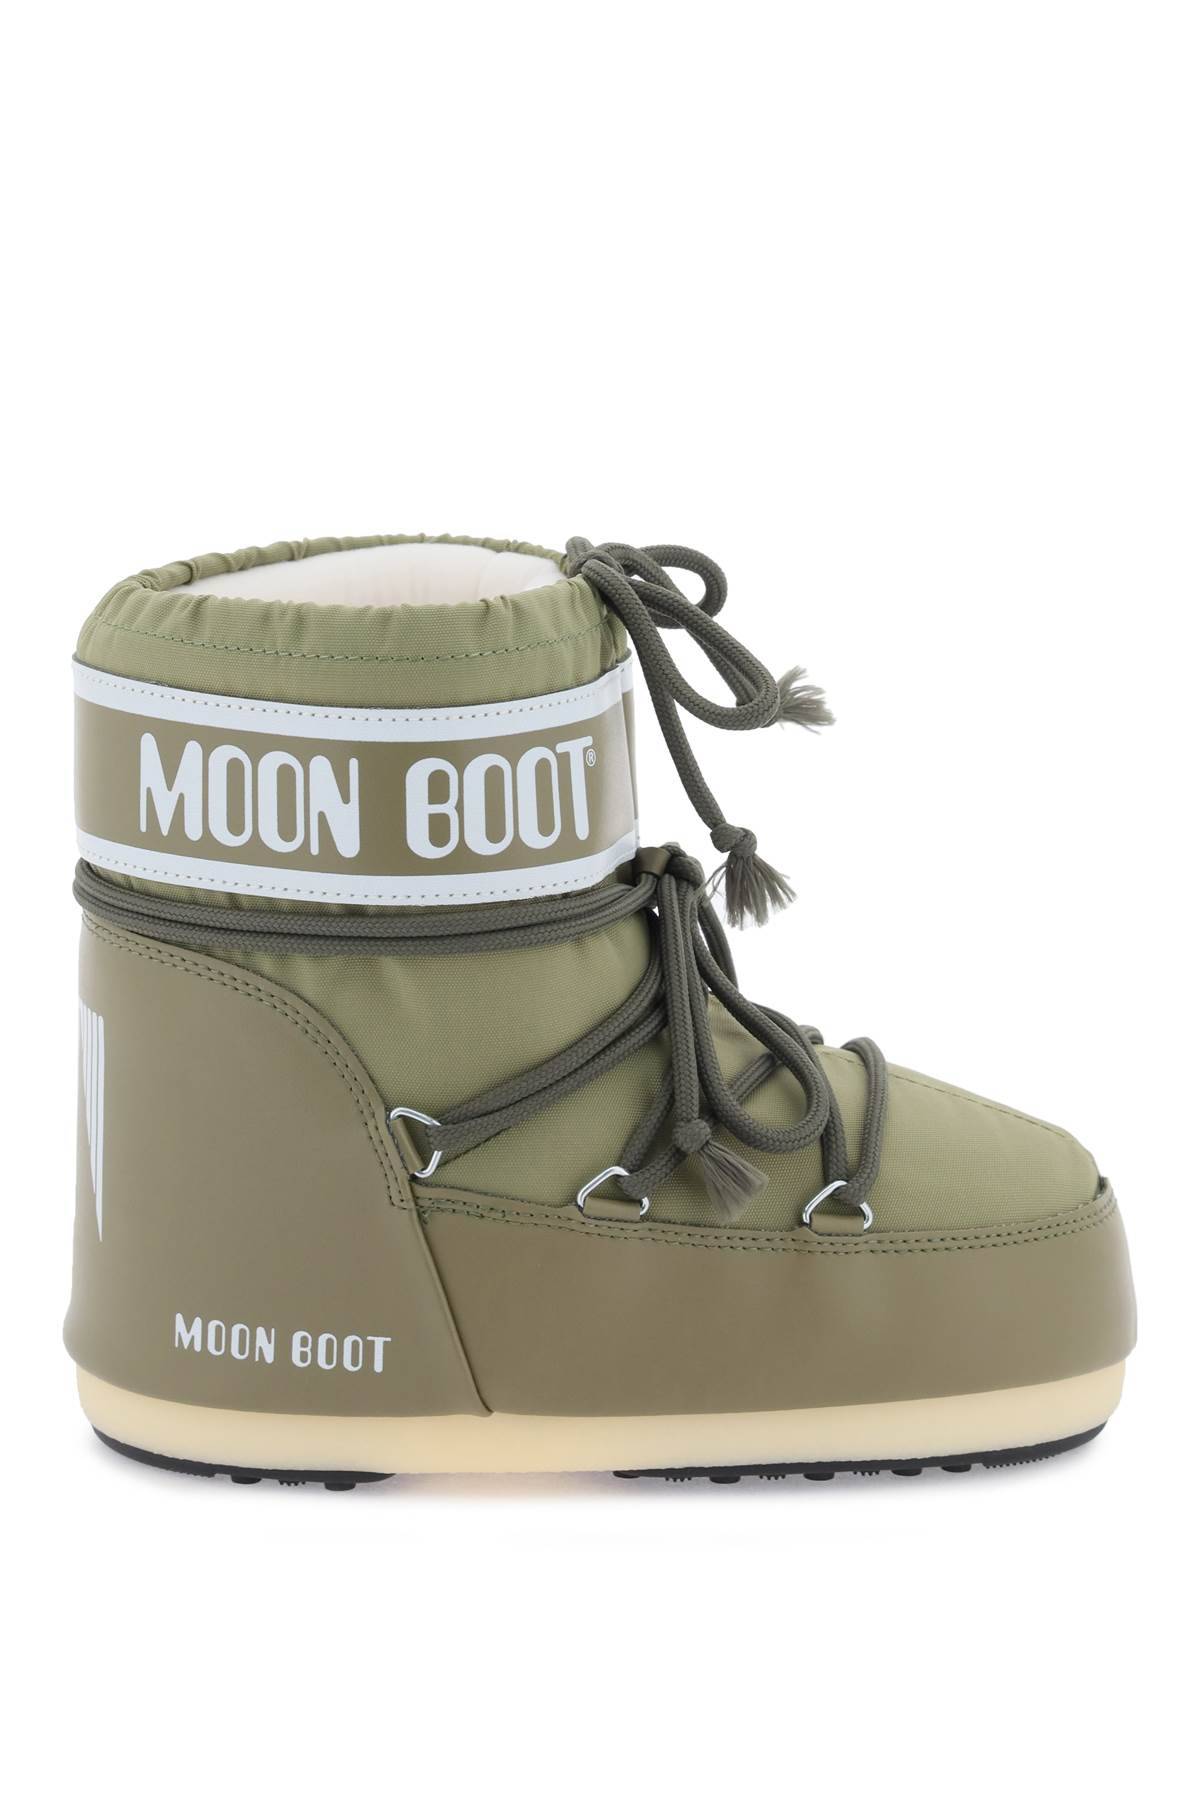 Moon Boot MOON BOOT icon low apres-ski boots